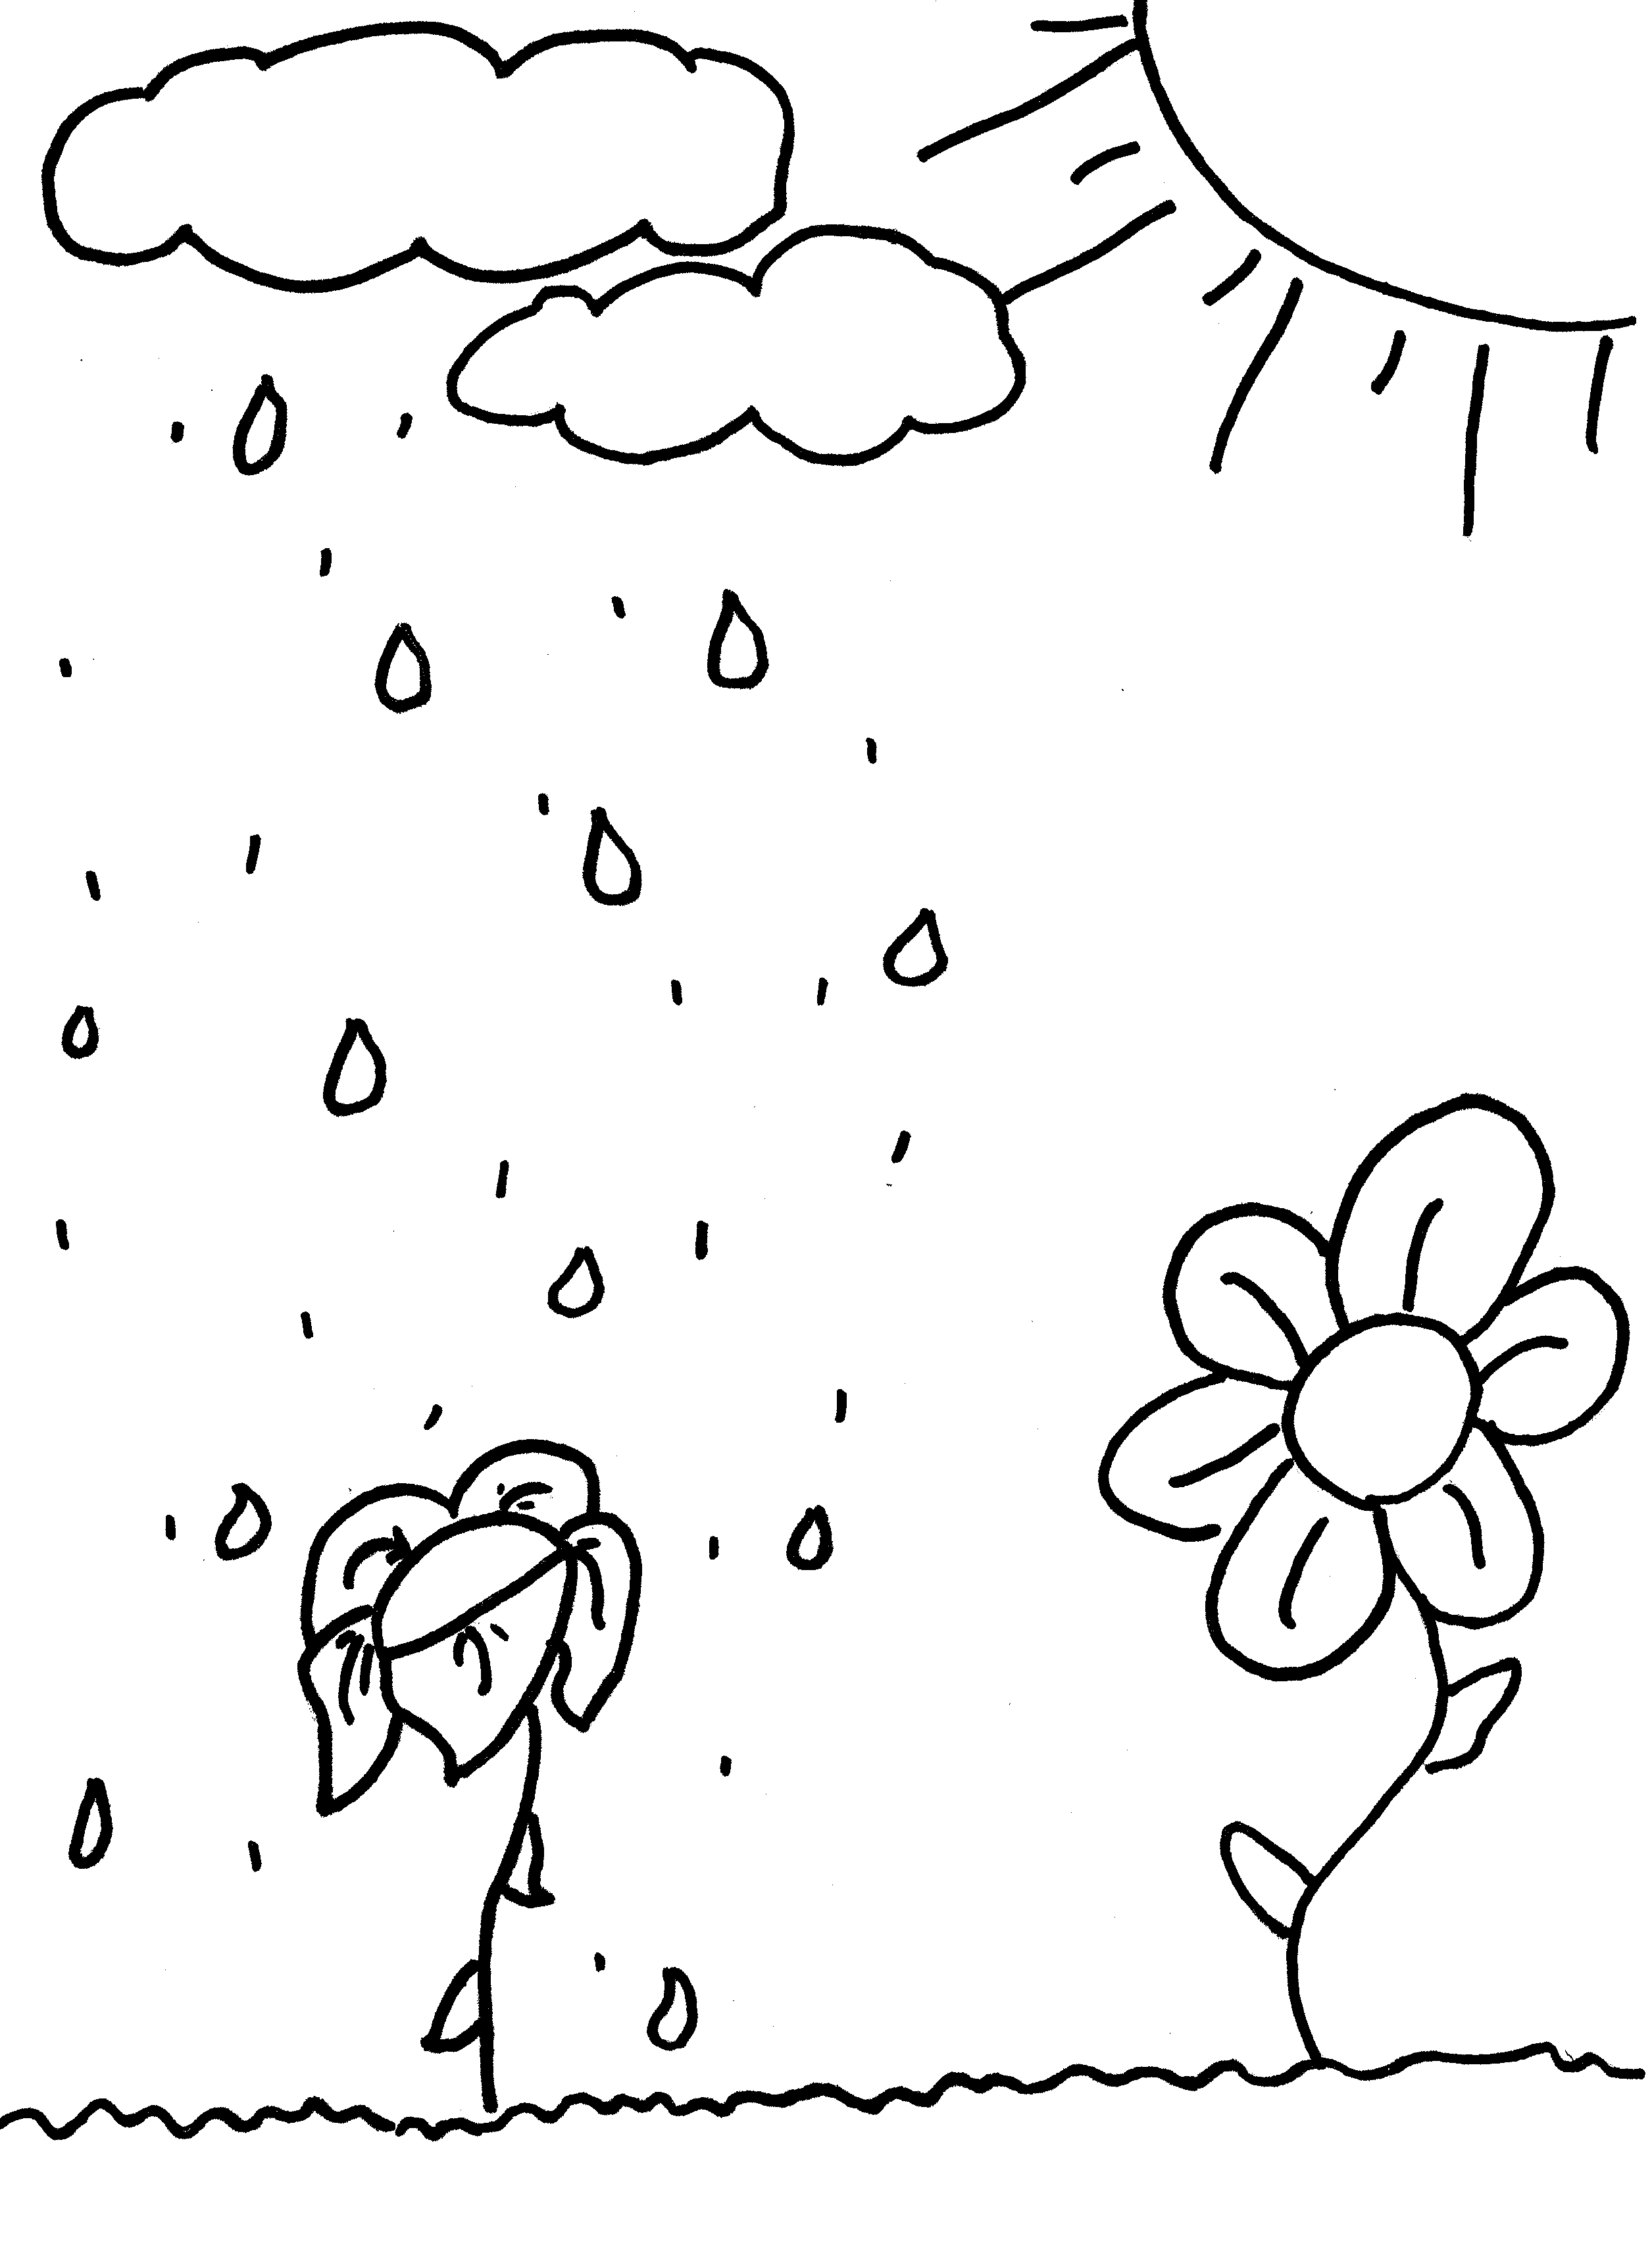 Free coloring page sun shower with flowers